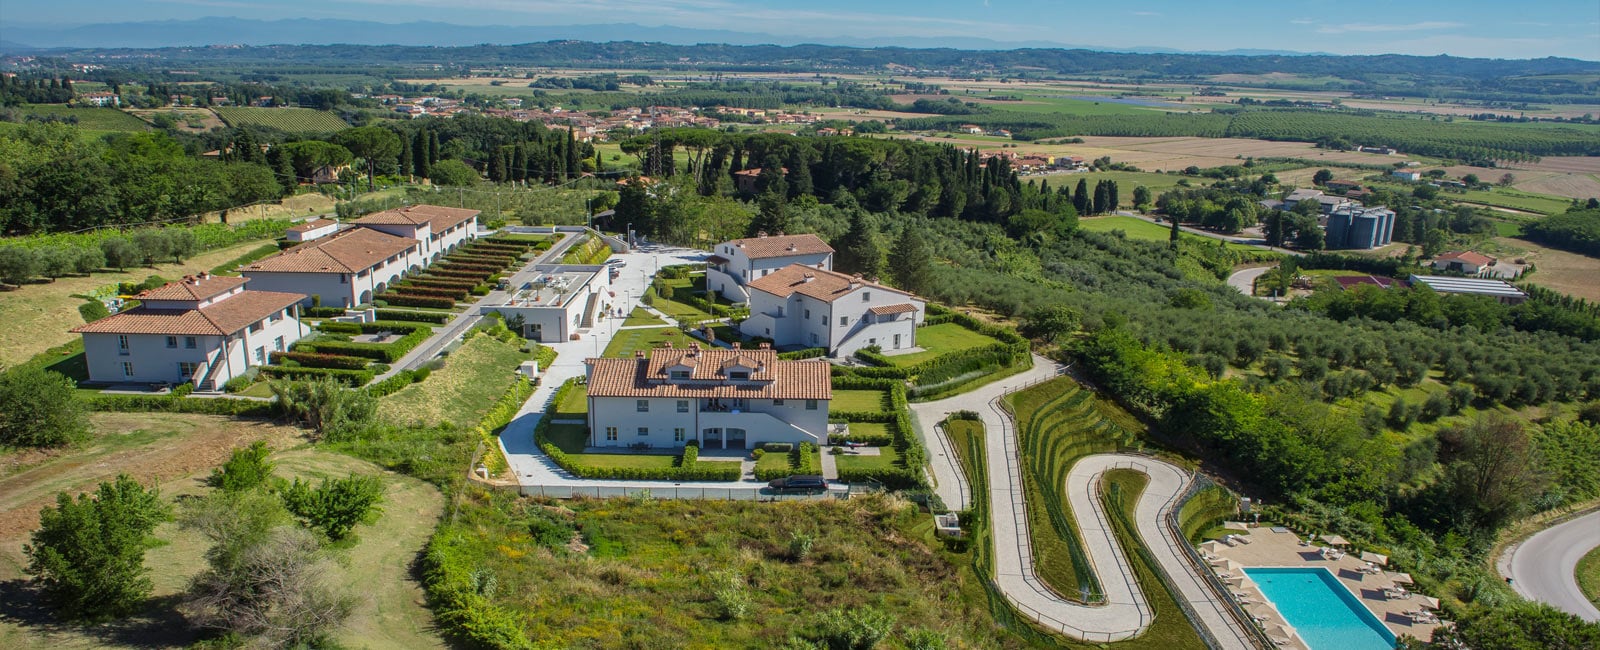 Aerial View of Borgo alle Vigne Resort in Tuscany, Italy